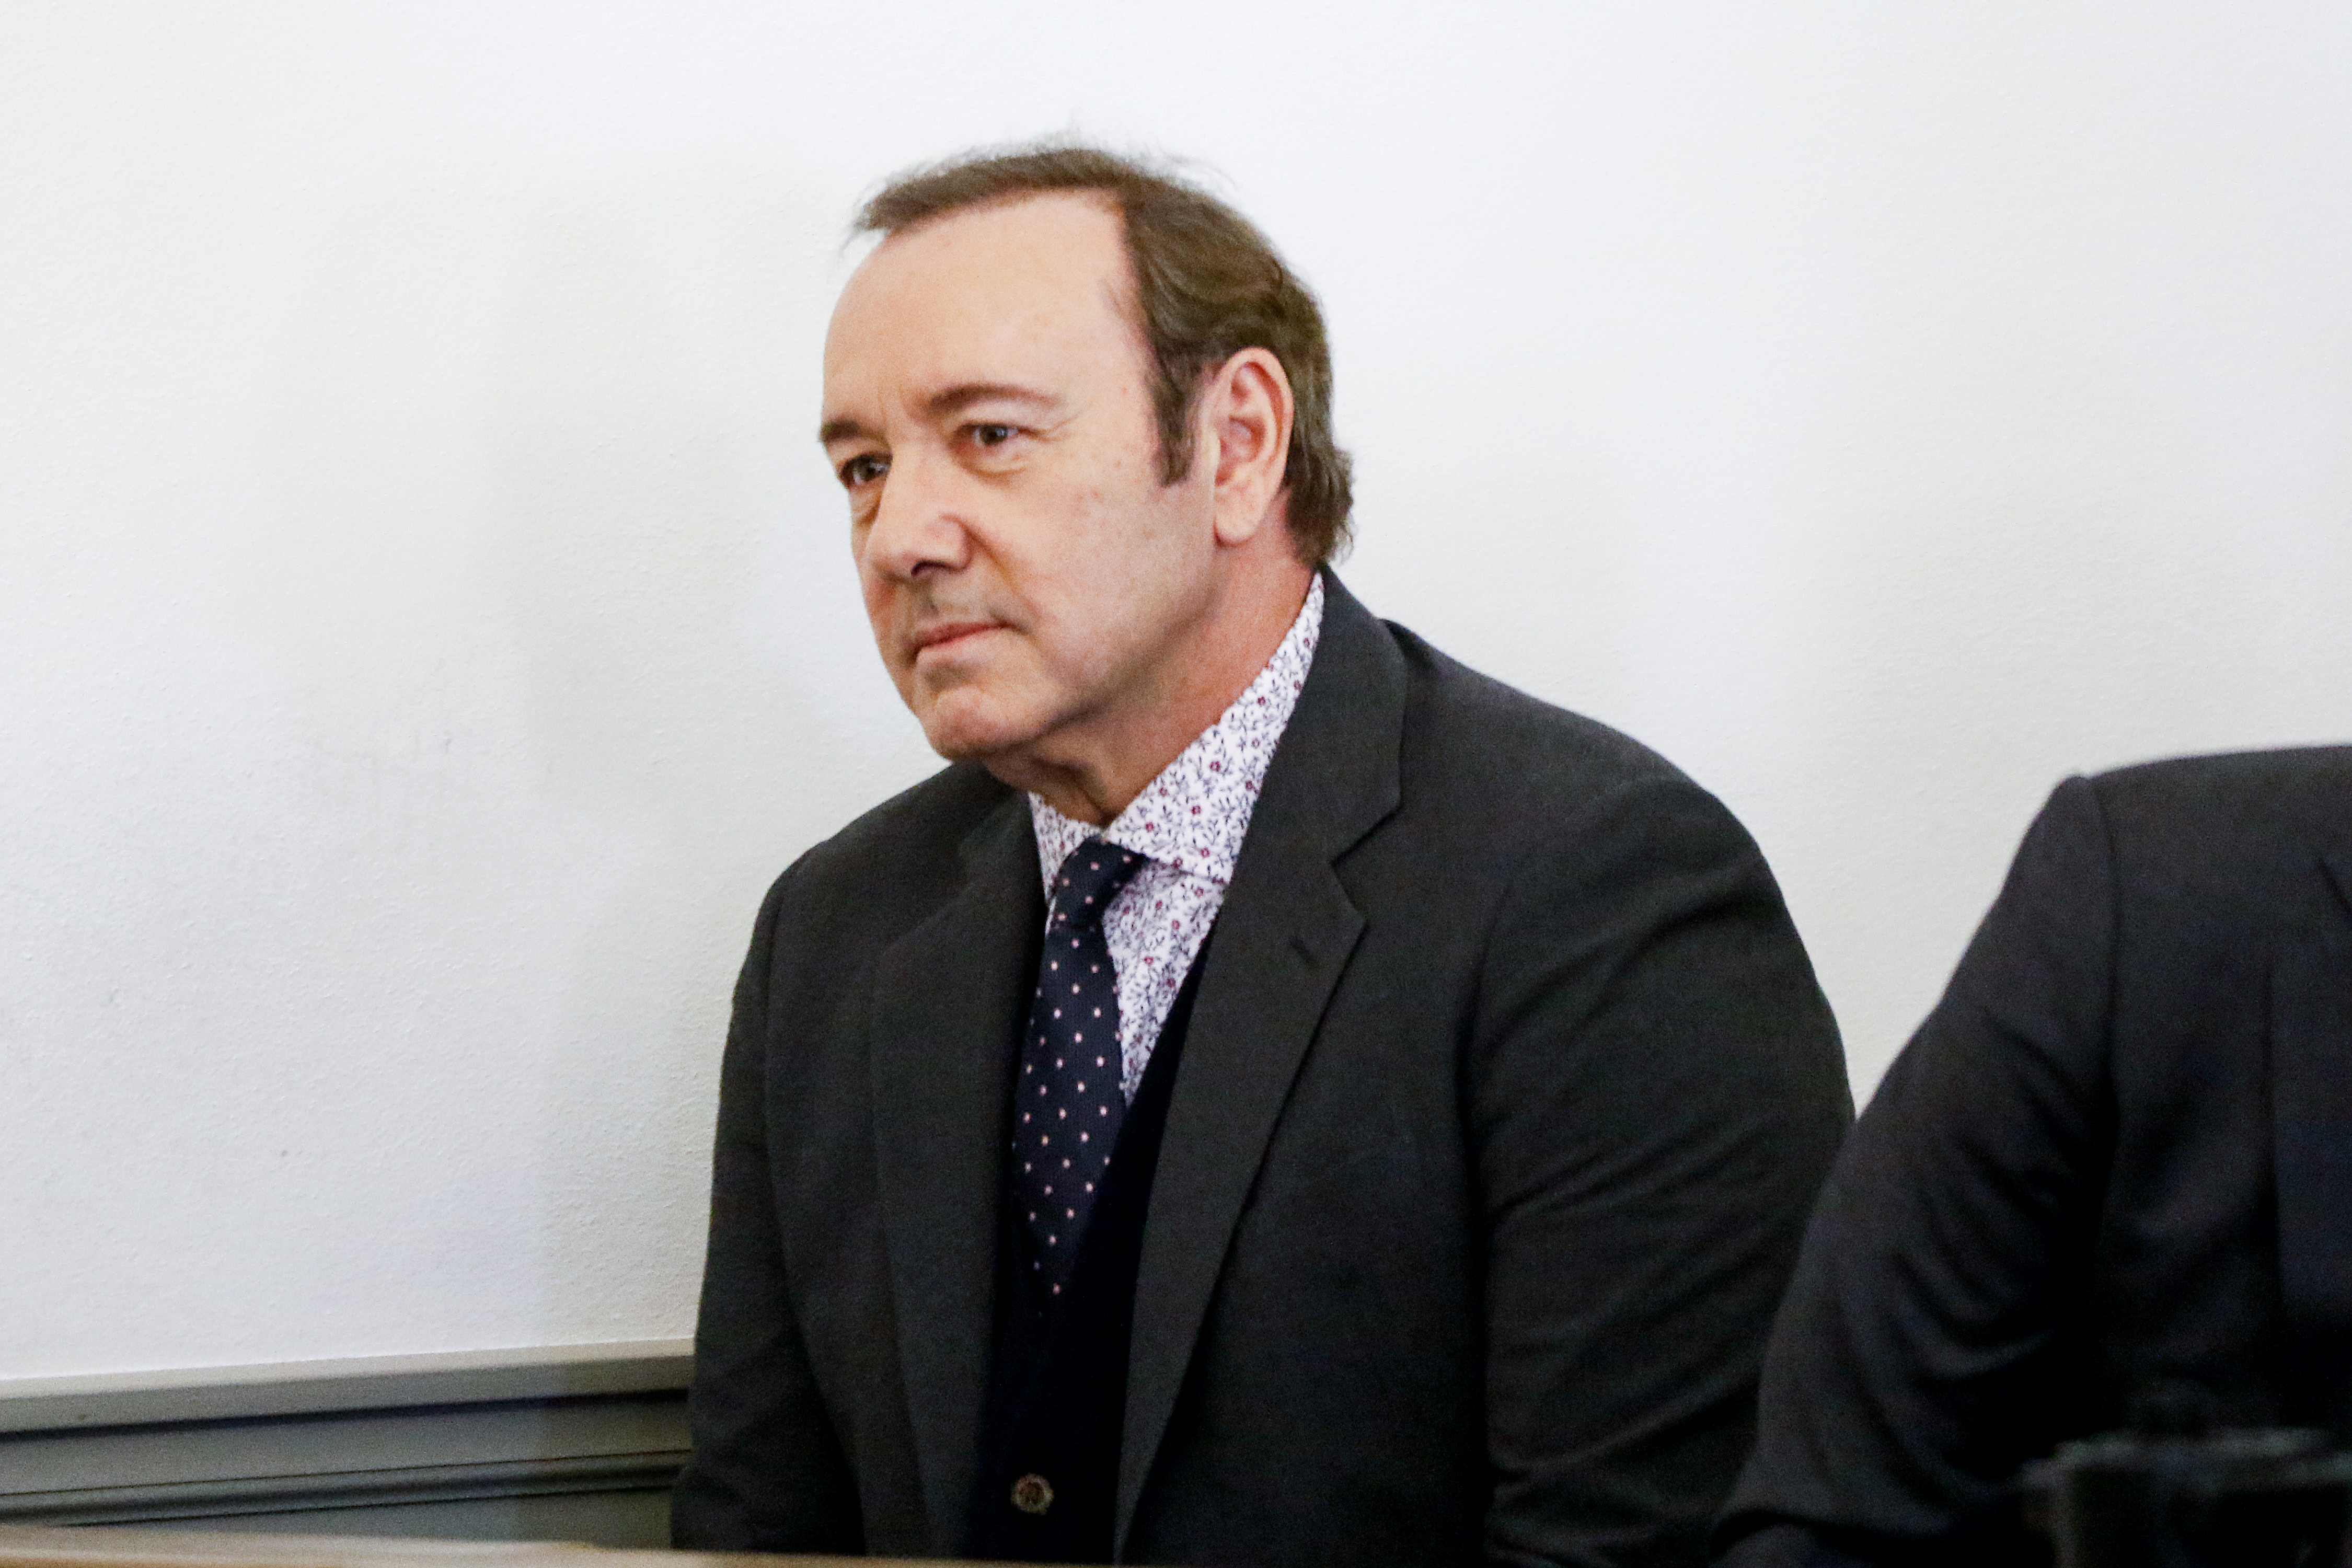 Kevin Spacey to ‘Voluntarily Appear’ in Court Over Multiple Sexual Assault Charges